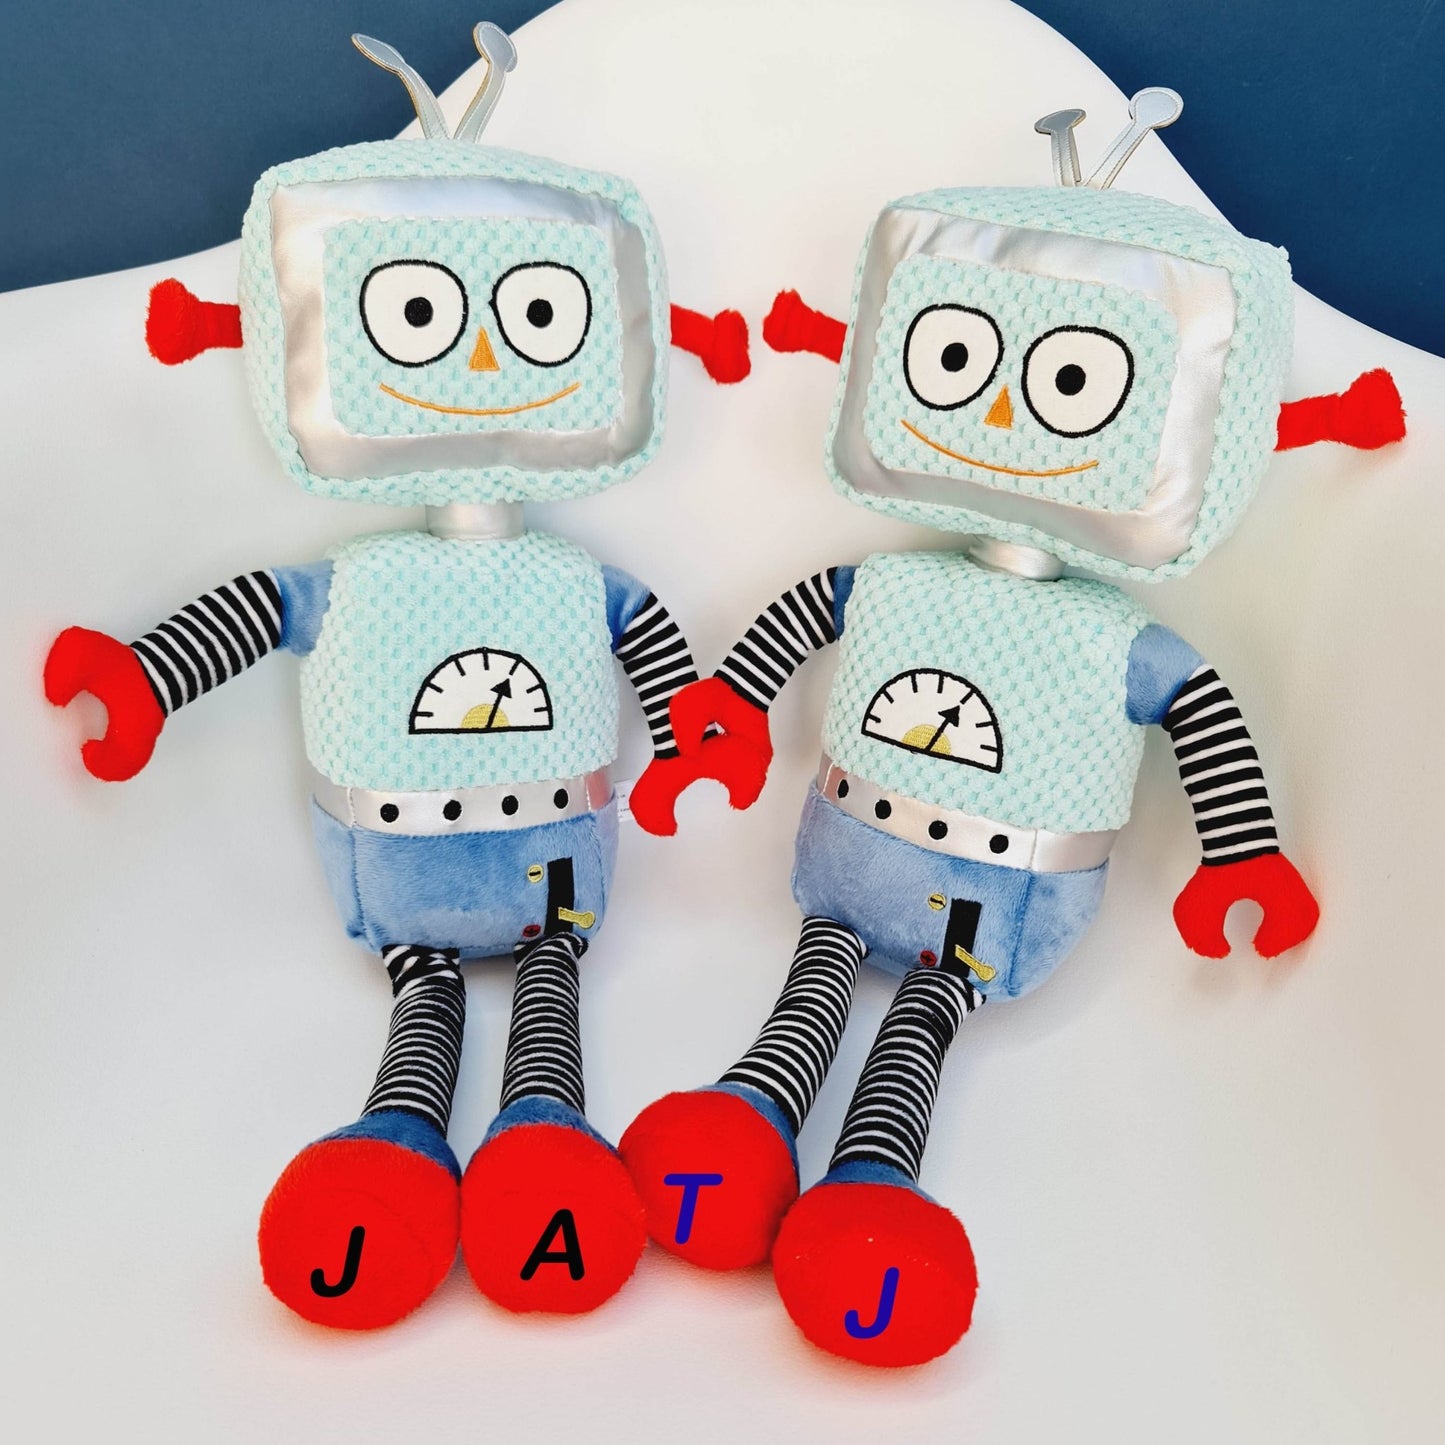 Personalised Large Soft Toy Robot from WilberryKiddioSoft Toys